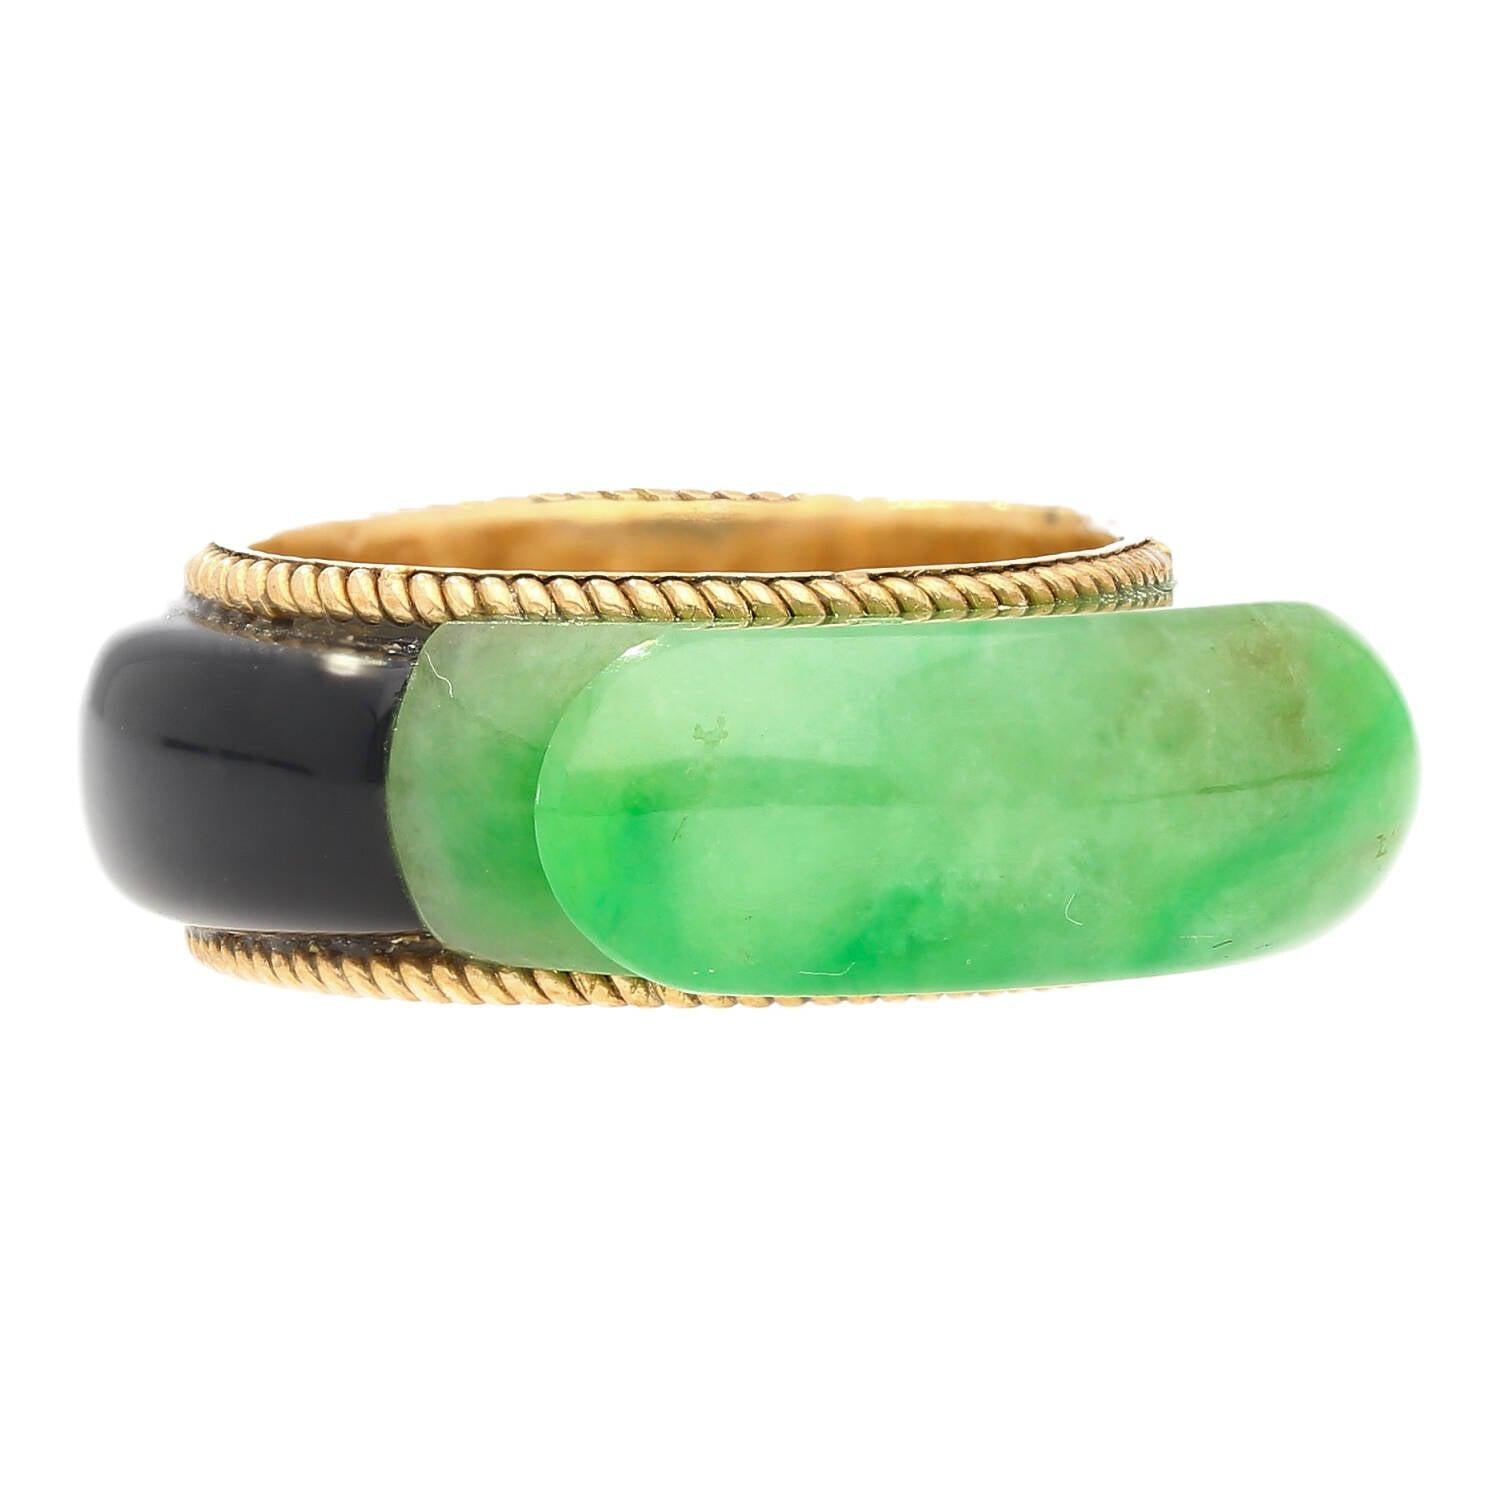 Vintage-11_40-Carved-Jade-with-Onyx-Band-Ring-in-14K-Yellow-Gold-Rings.jpg